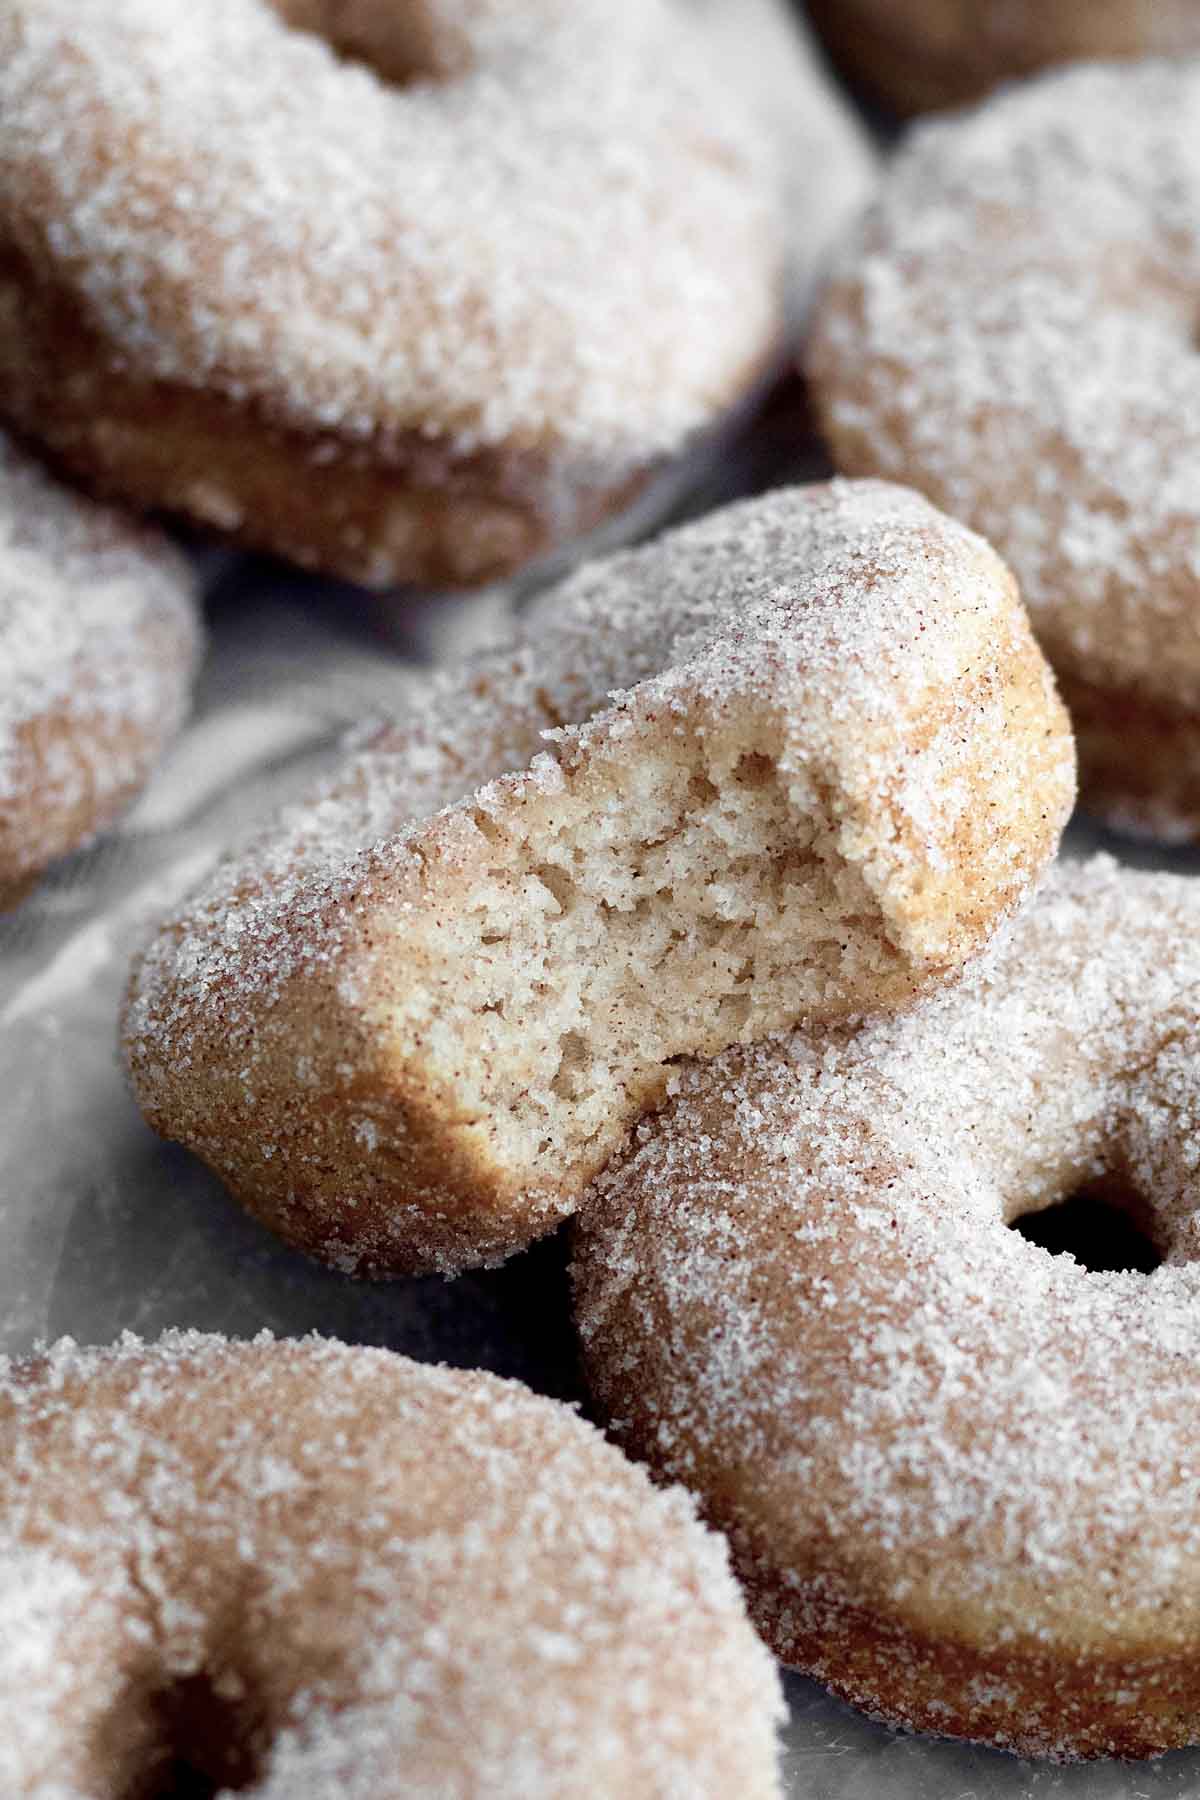 A look at the granulated sugar and cinnamon on the donuts.